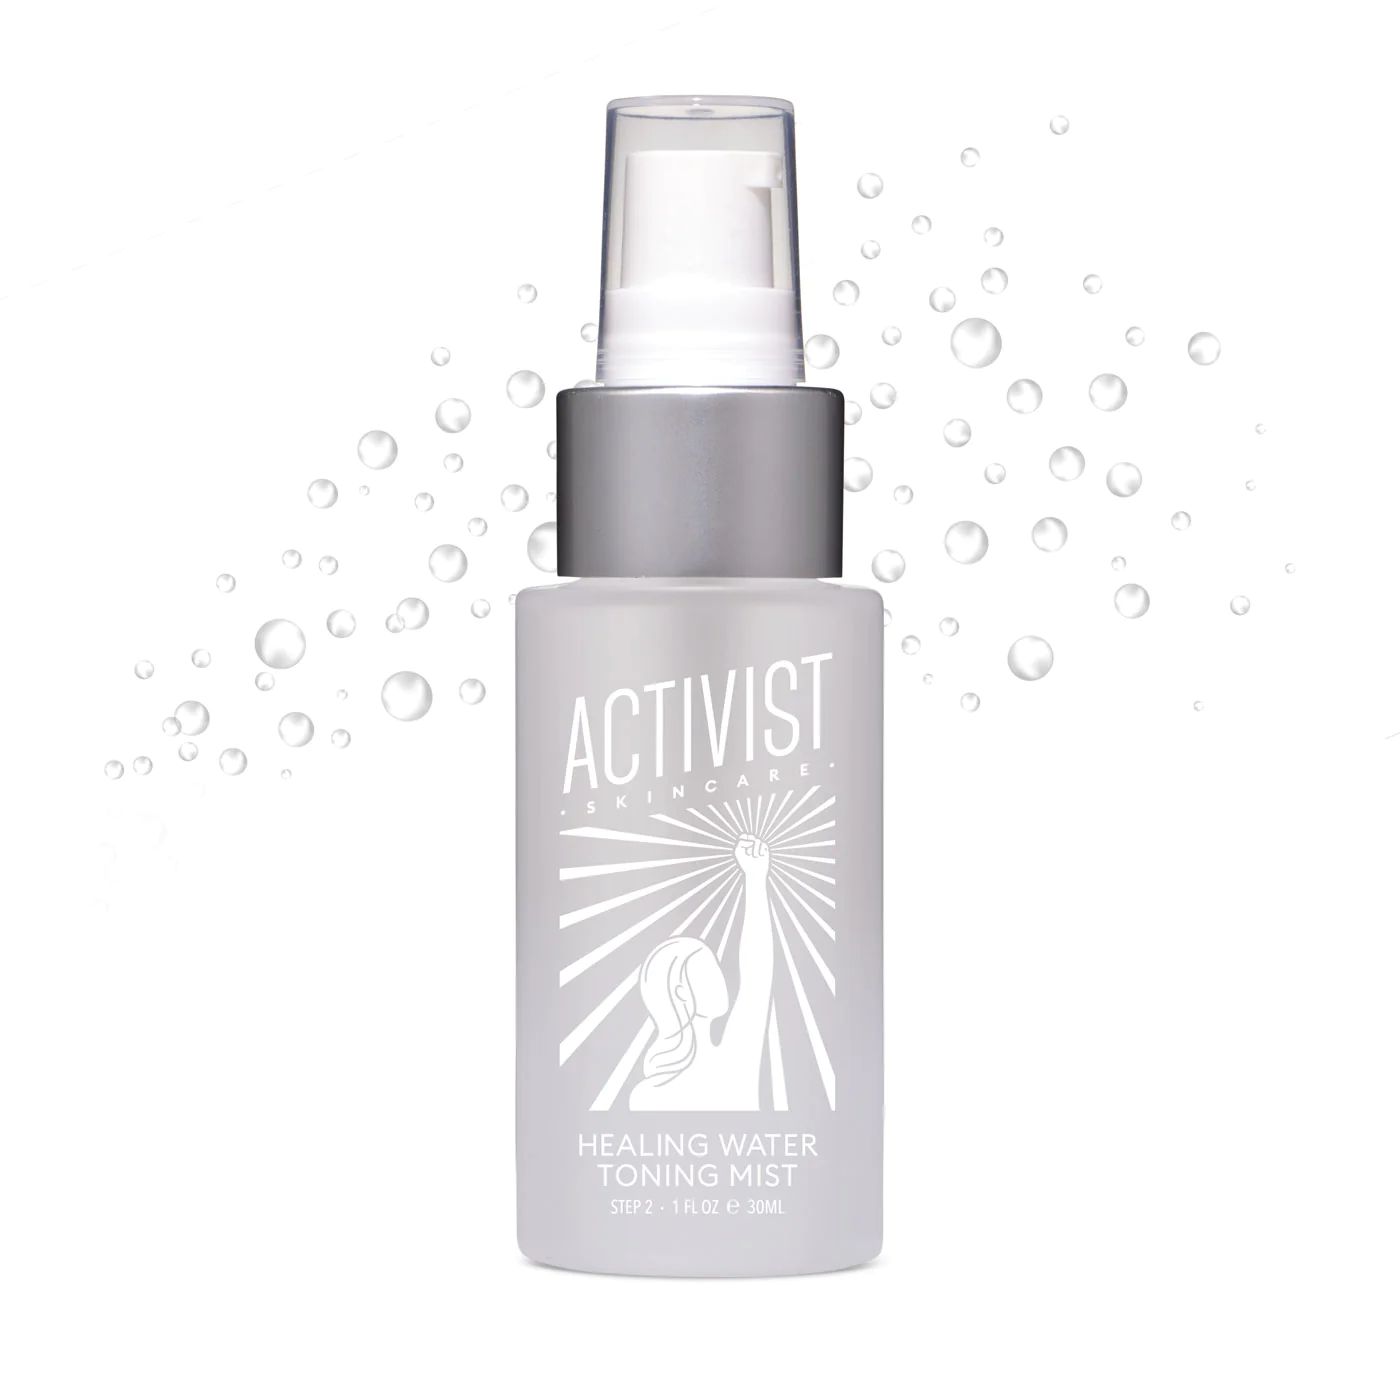 Healing Water Toning Mist from Activist Skincare | Activist Skincare